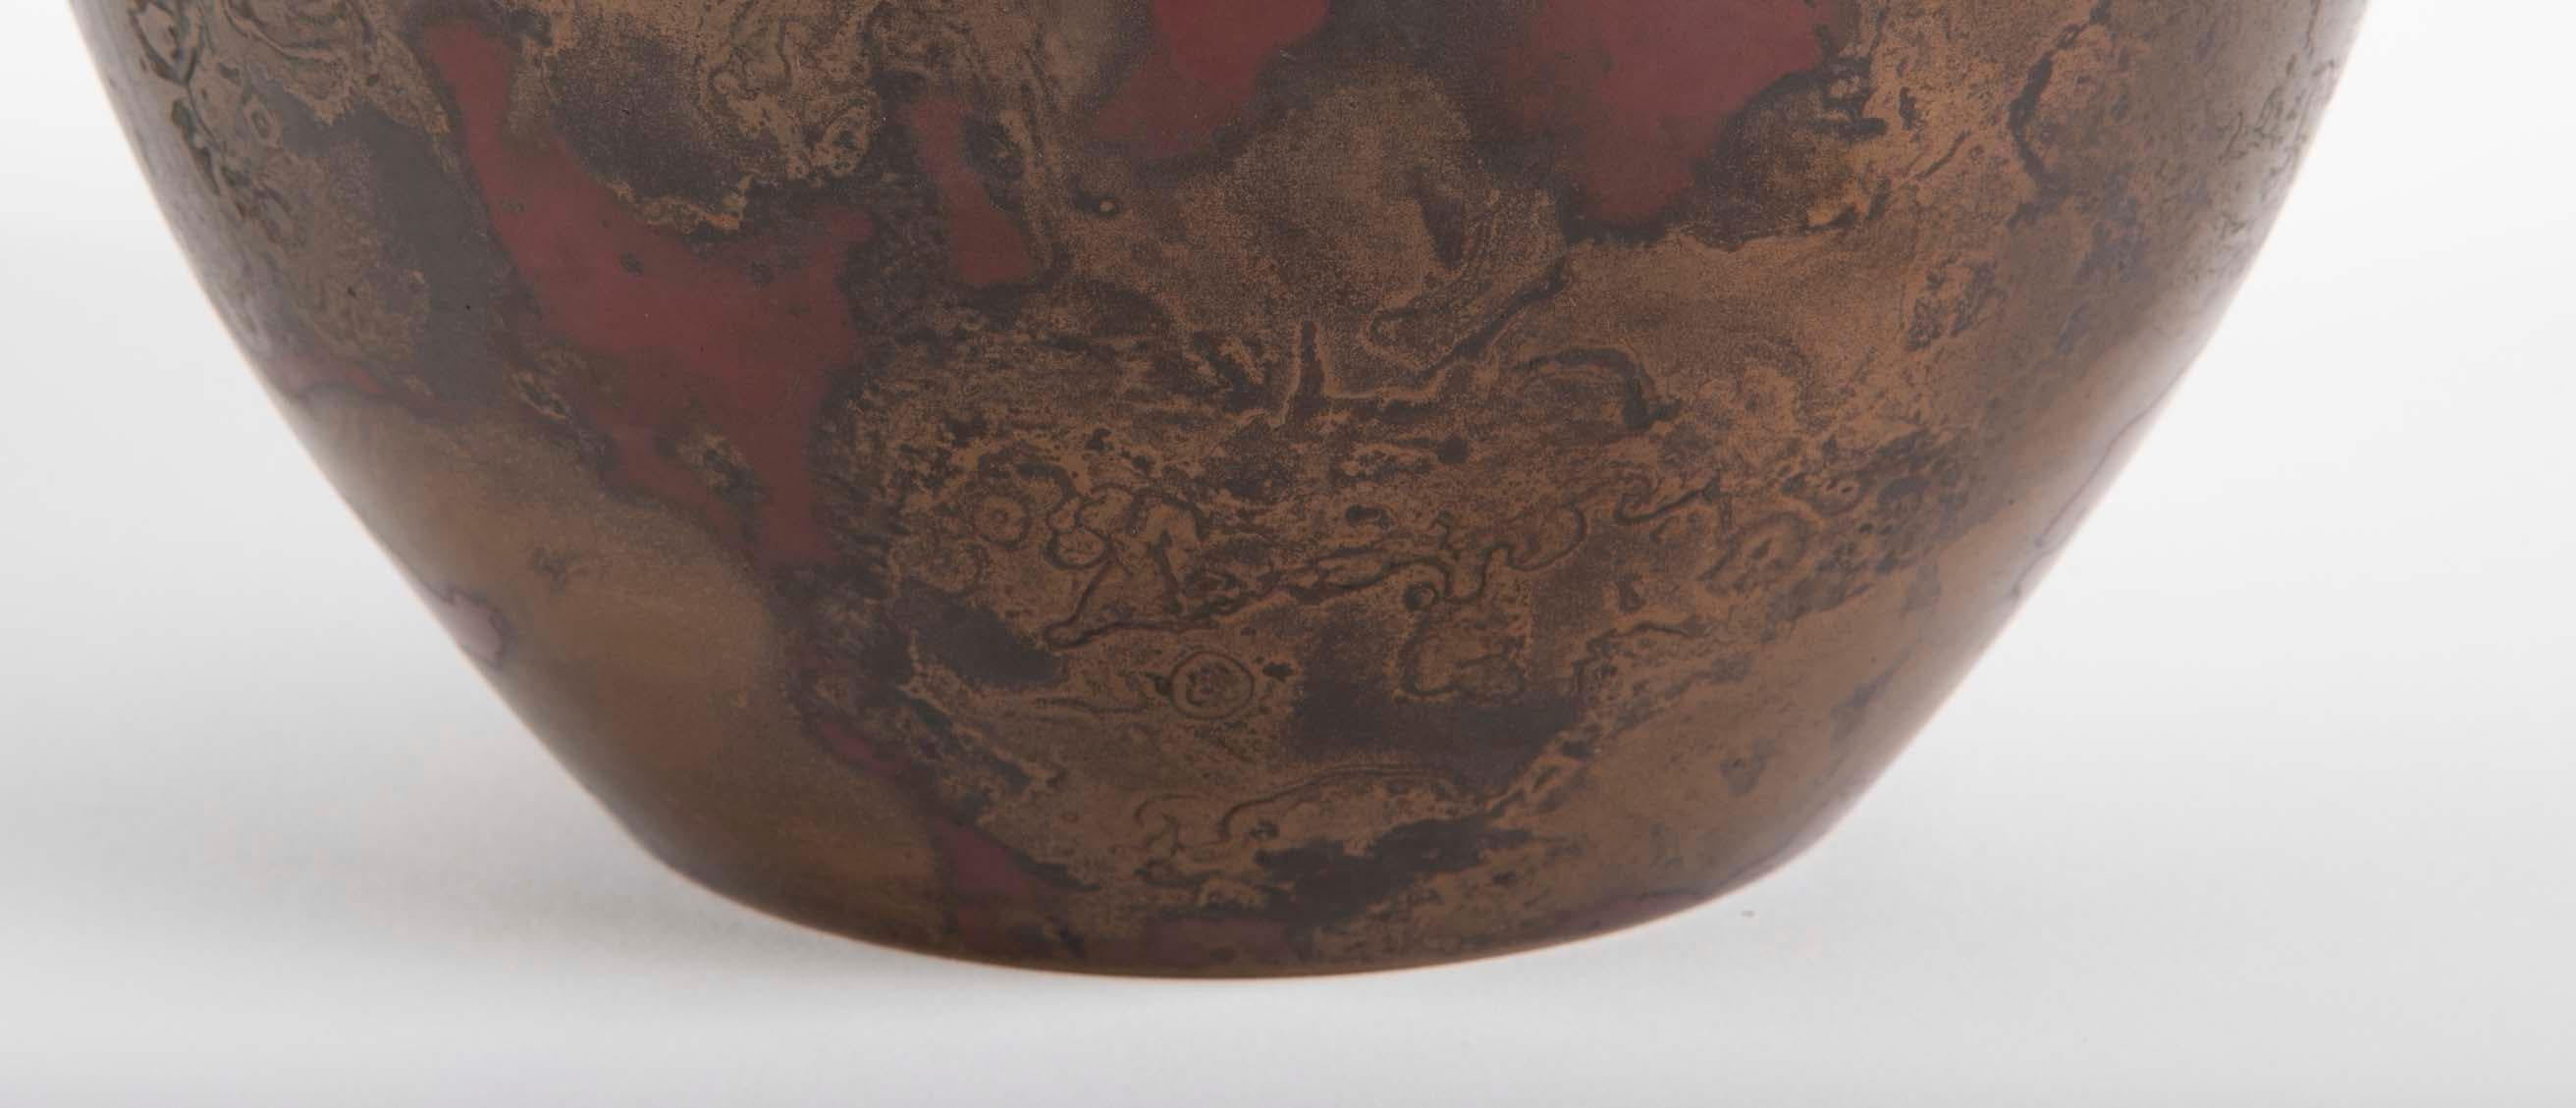 Japanese Bronze Vase with Marbleized Patina In Good Condition For Sale In Stamford, CT